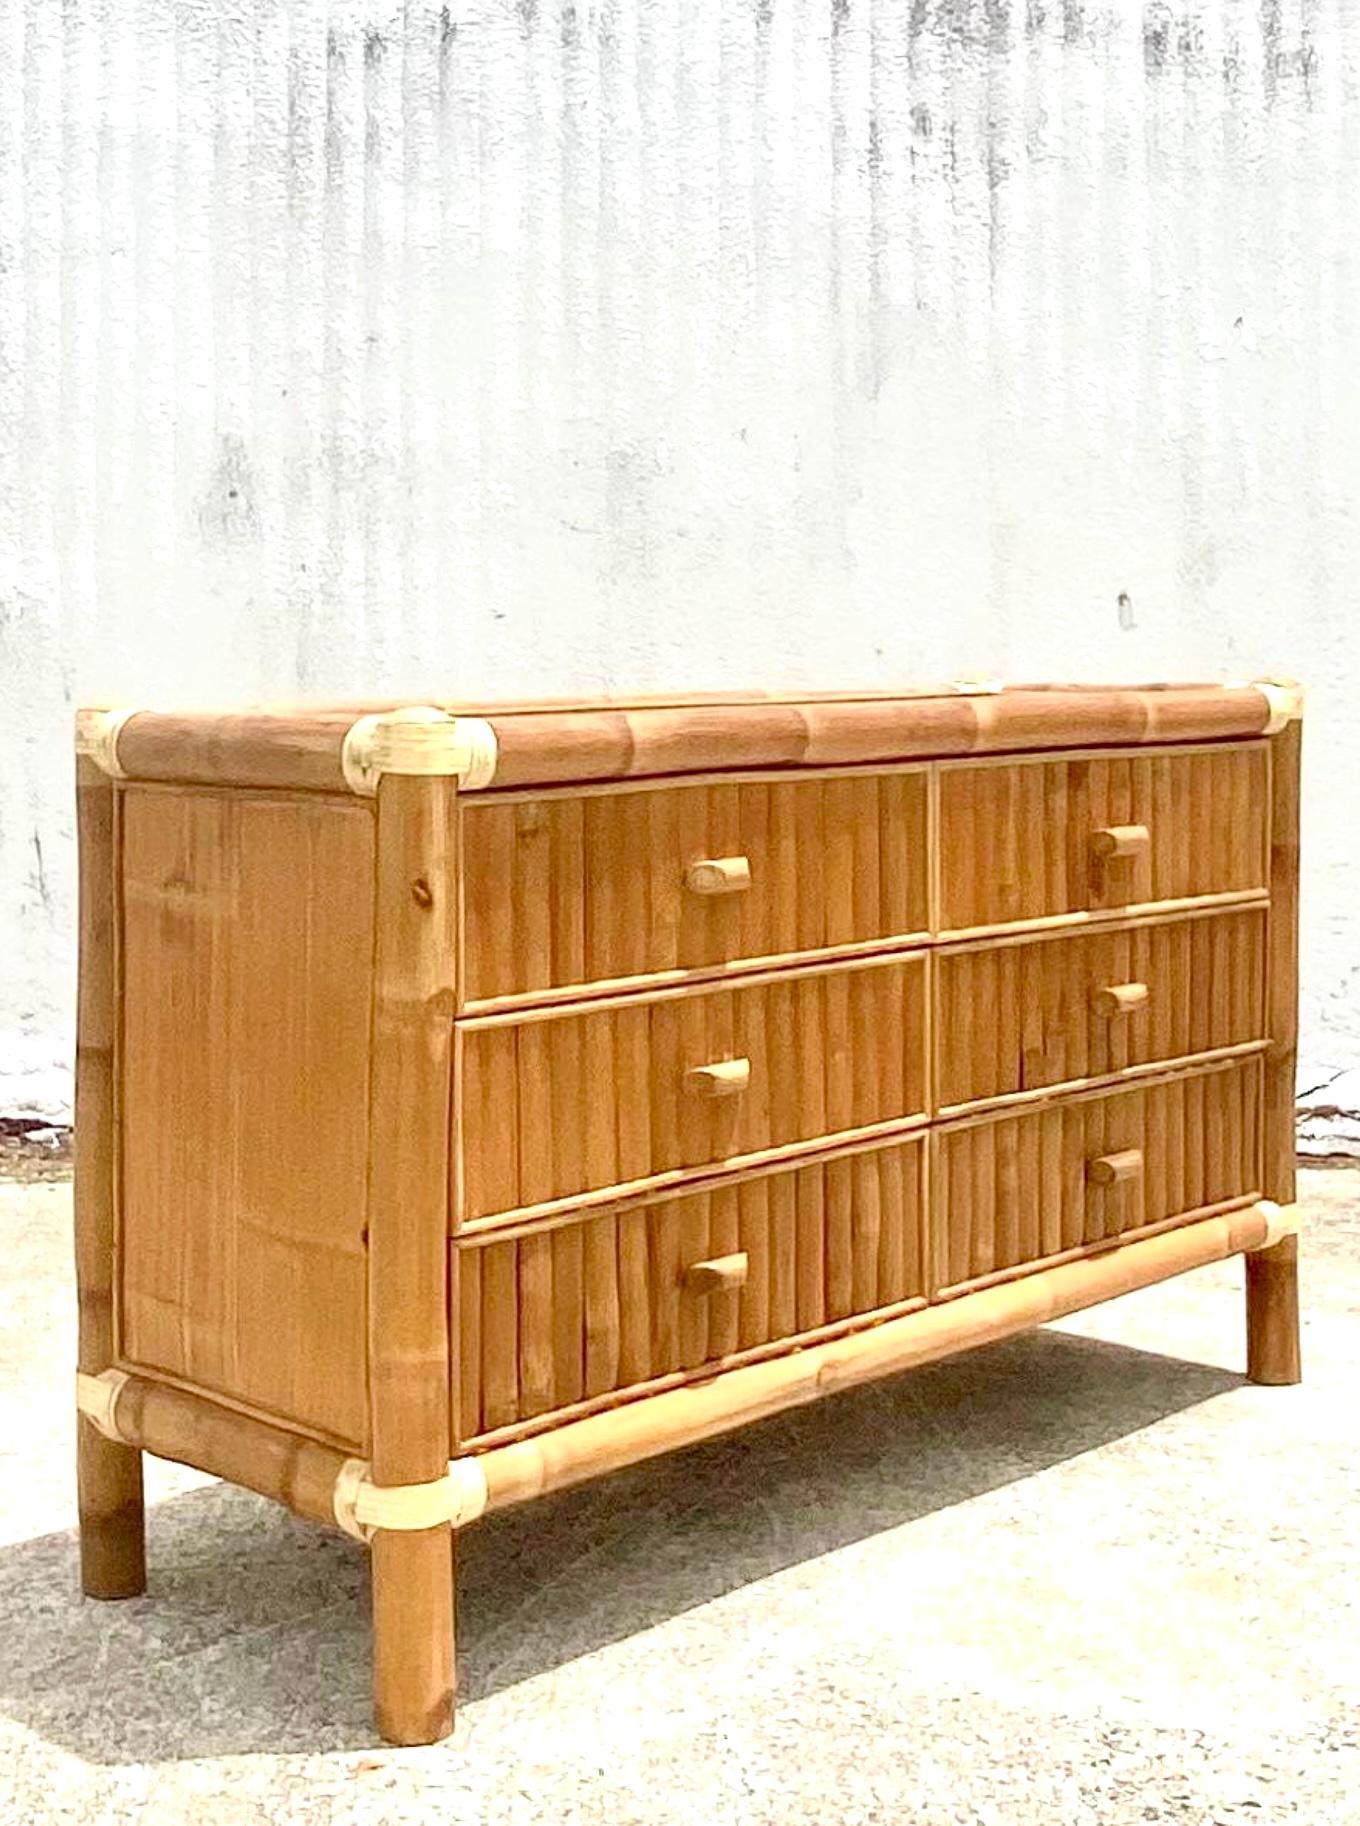 Fantastic vintage split bamboo dresser. Chic elephant bamboo frame with split bamboo inset panels. Leather wraps on the joints. Acquired from a Palm Beach estate.